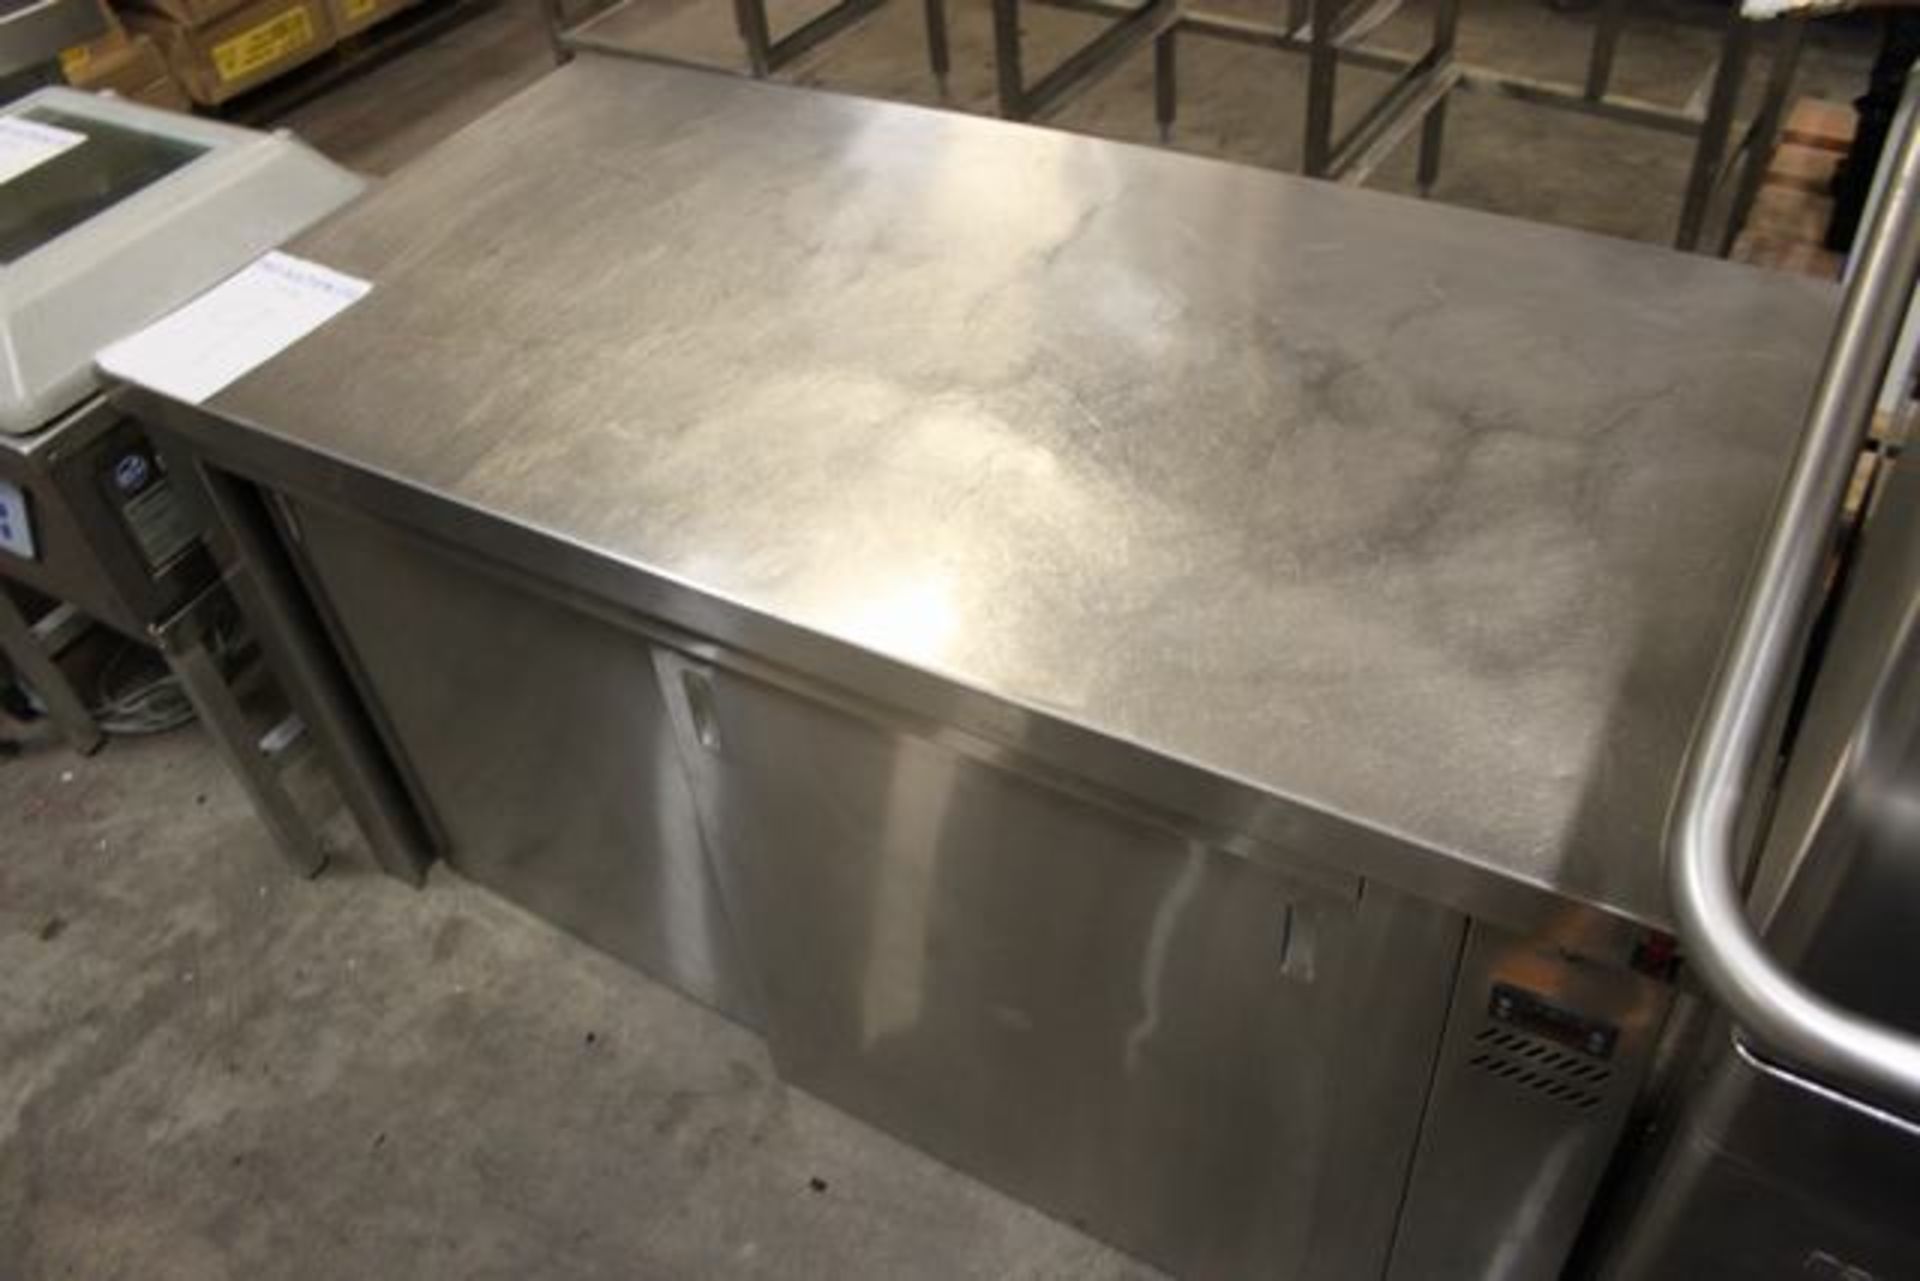 Stainless steel commercial hot cupboard 1380mm x 700mm x 870mm - Image 2 of 2